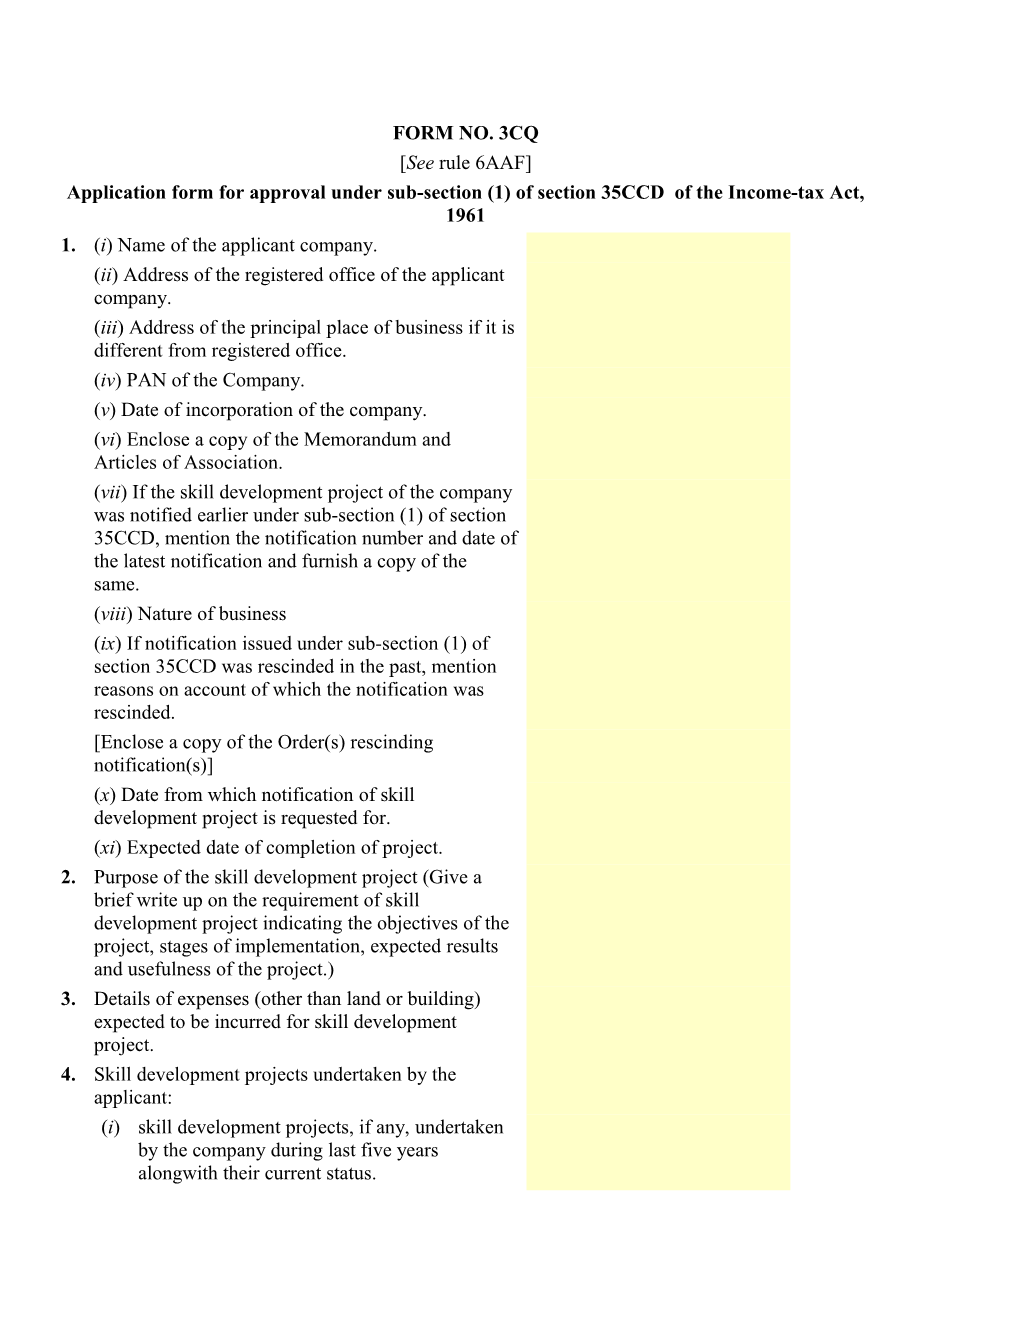 Application Form for Approval Under Sub-Section (1) of Section 35CCD of the Income-Tax